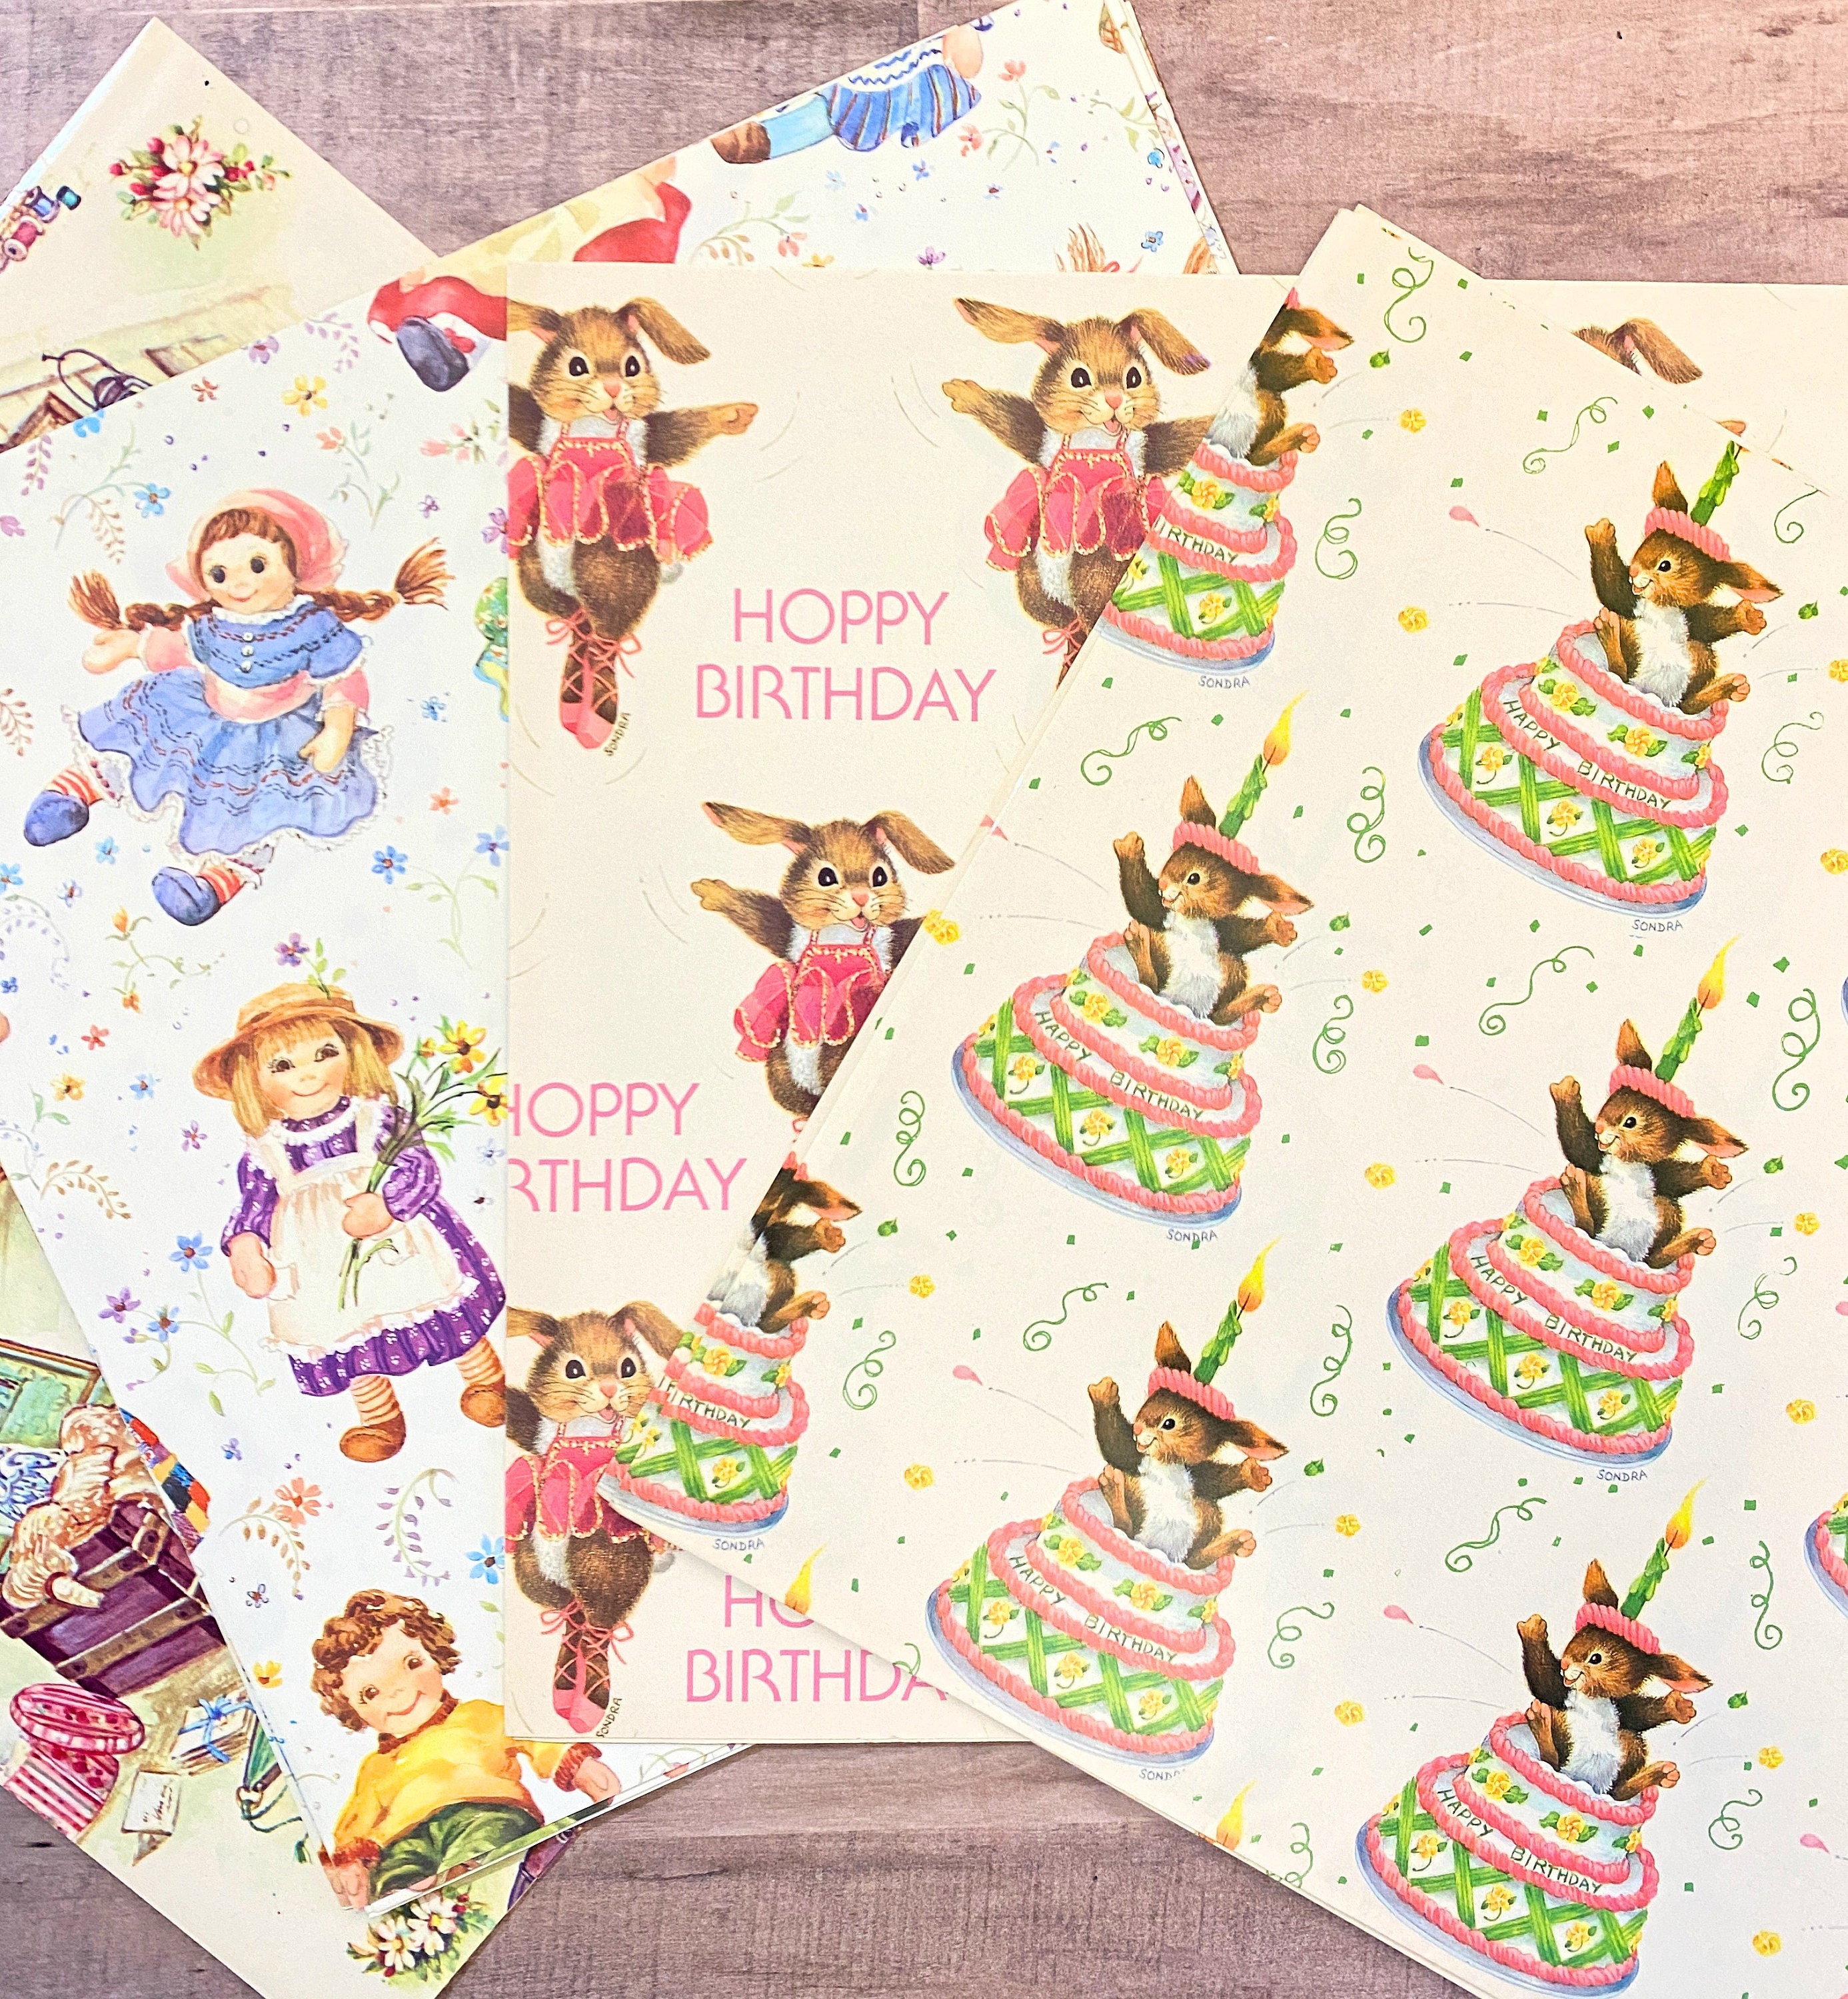 Hallmark Wrapping Paper. Bridal Shower Gift Wrap. Vintage Wrapping